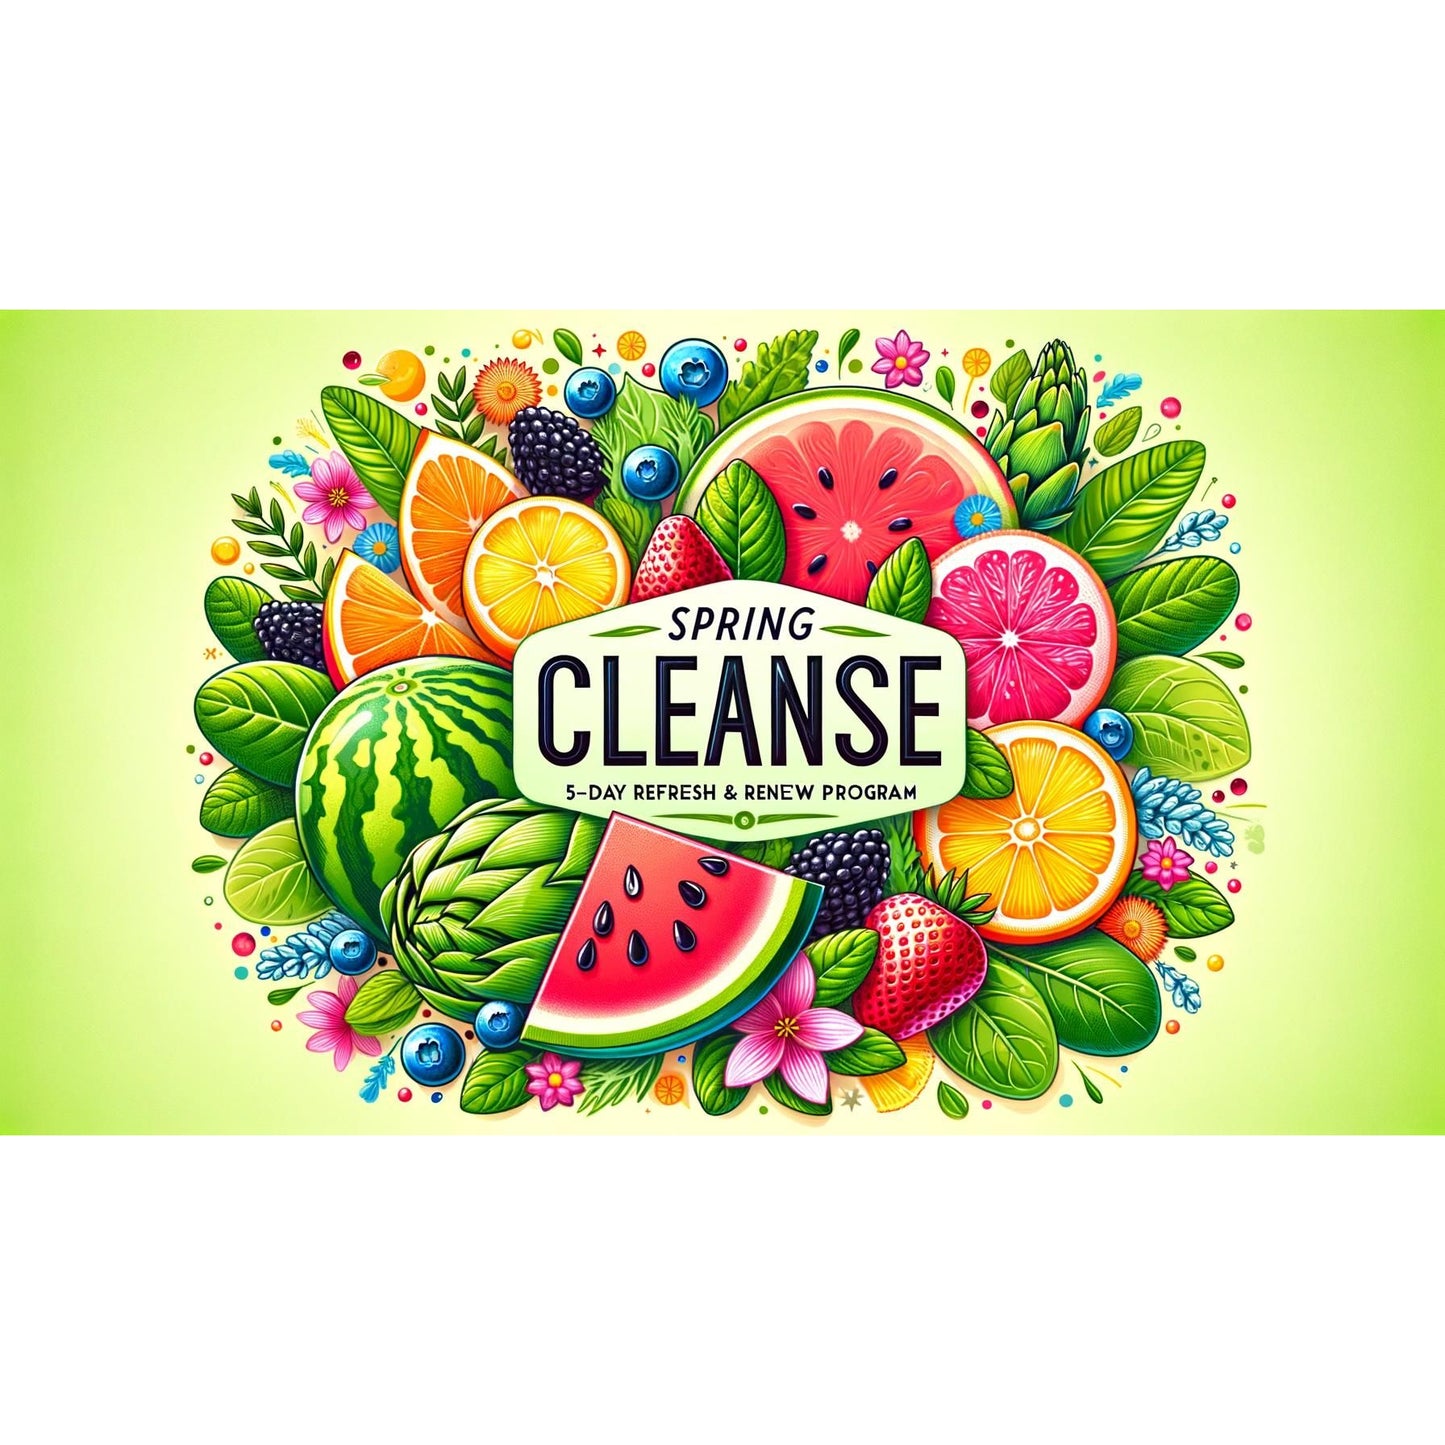 Spring Cleanse: 5-Day Refresh and Renew Program